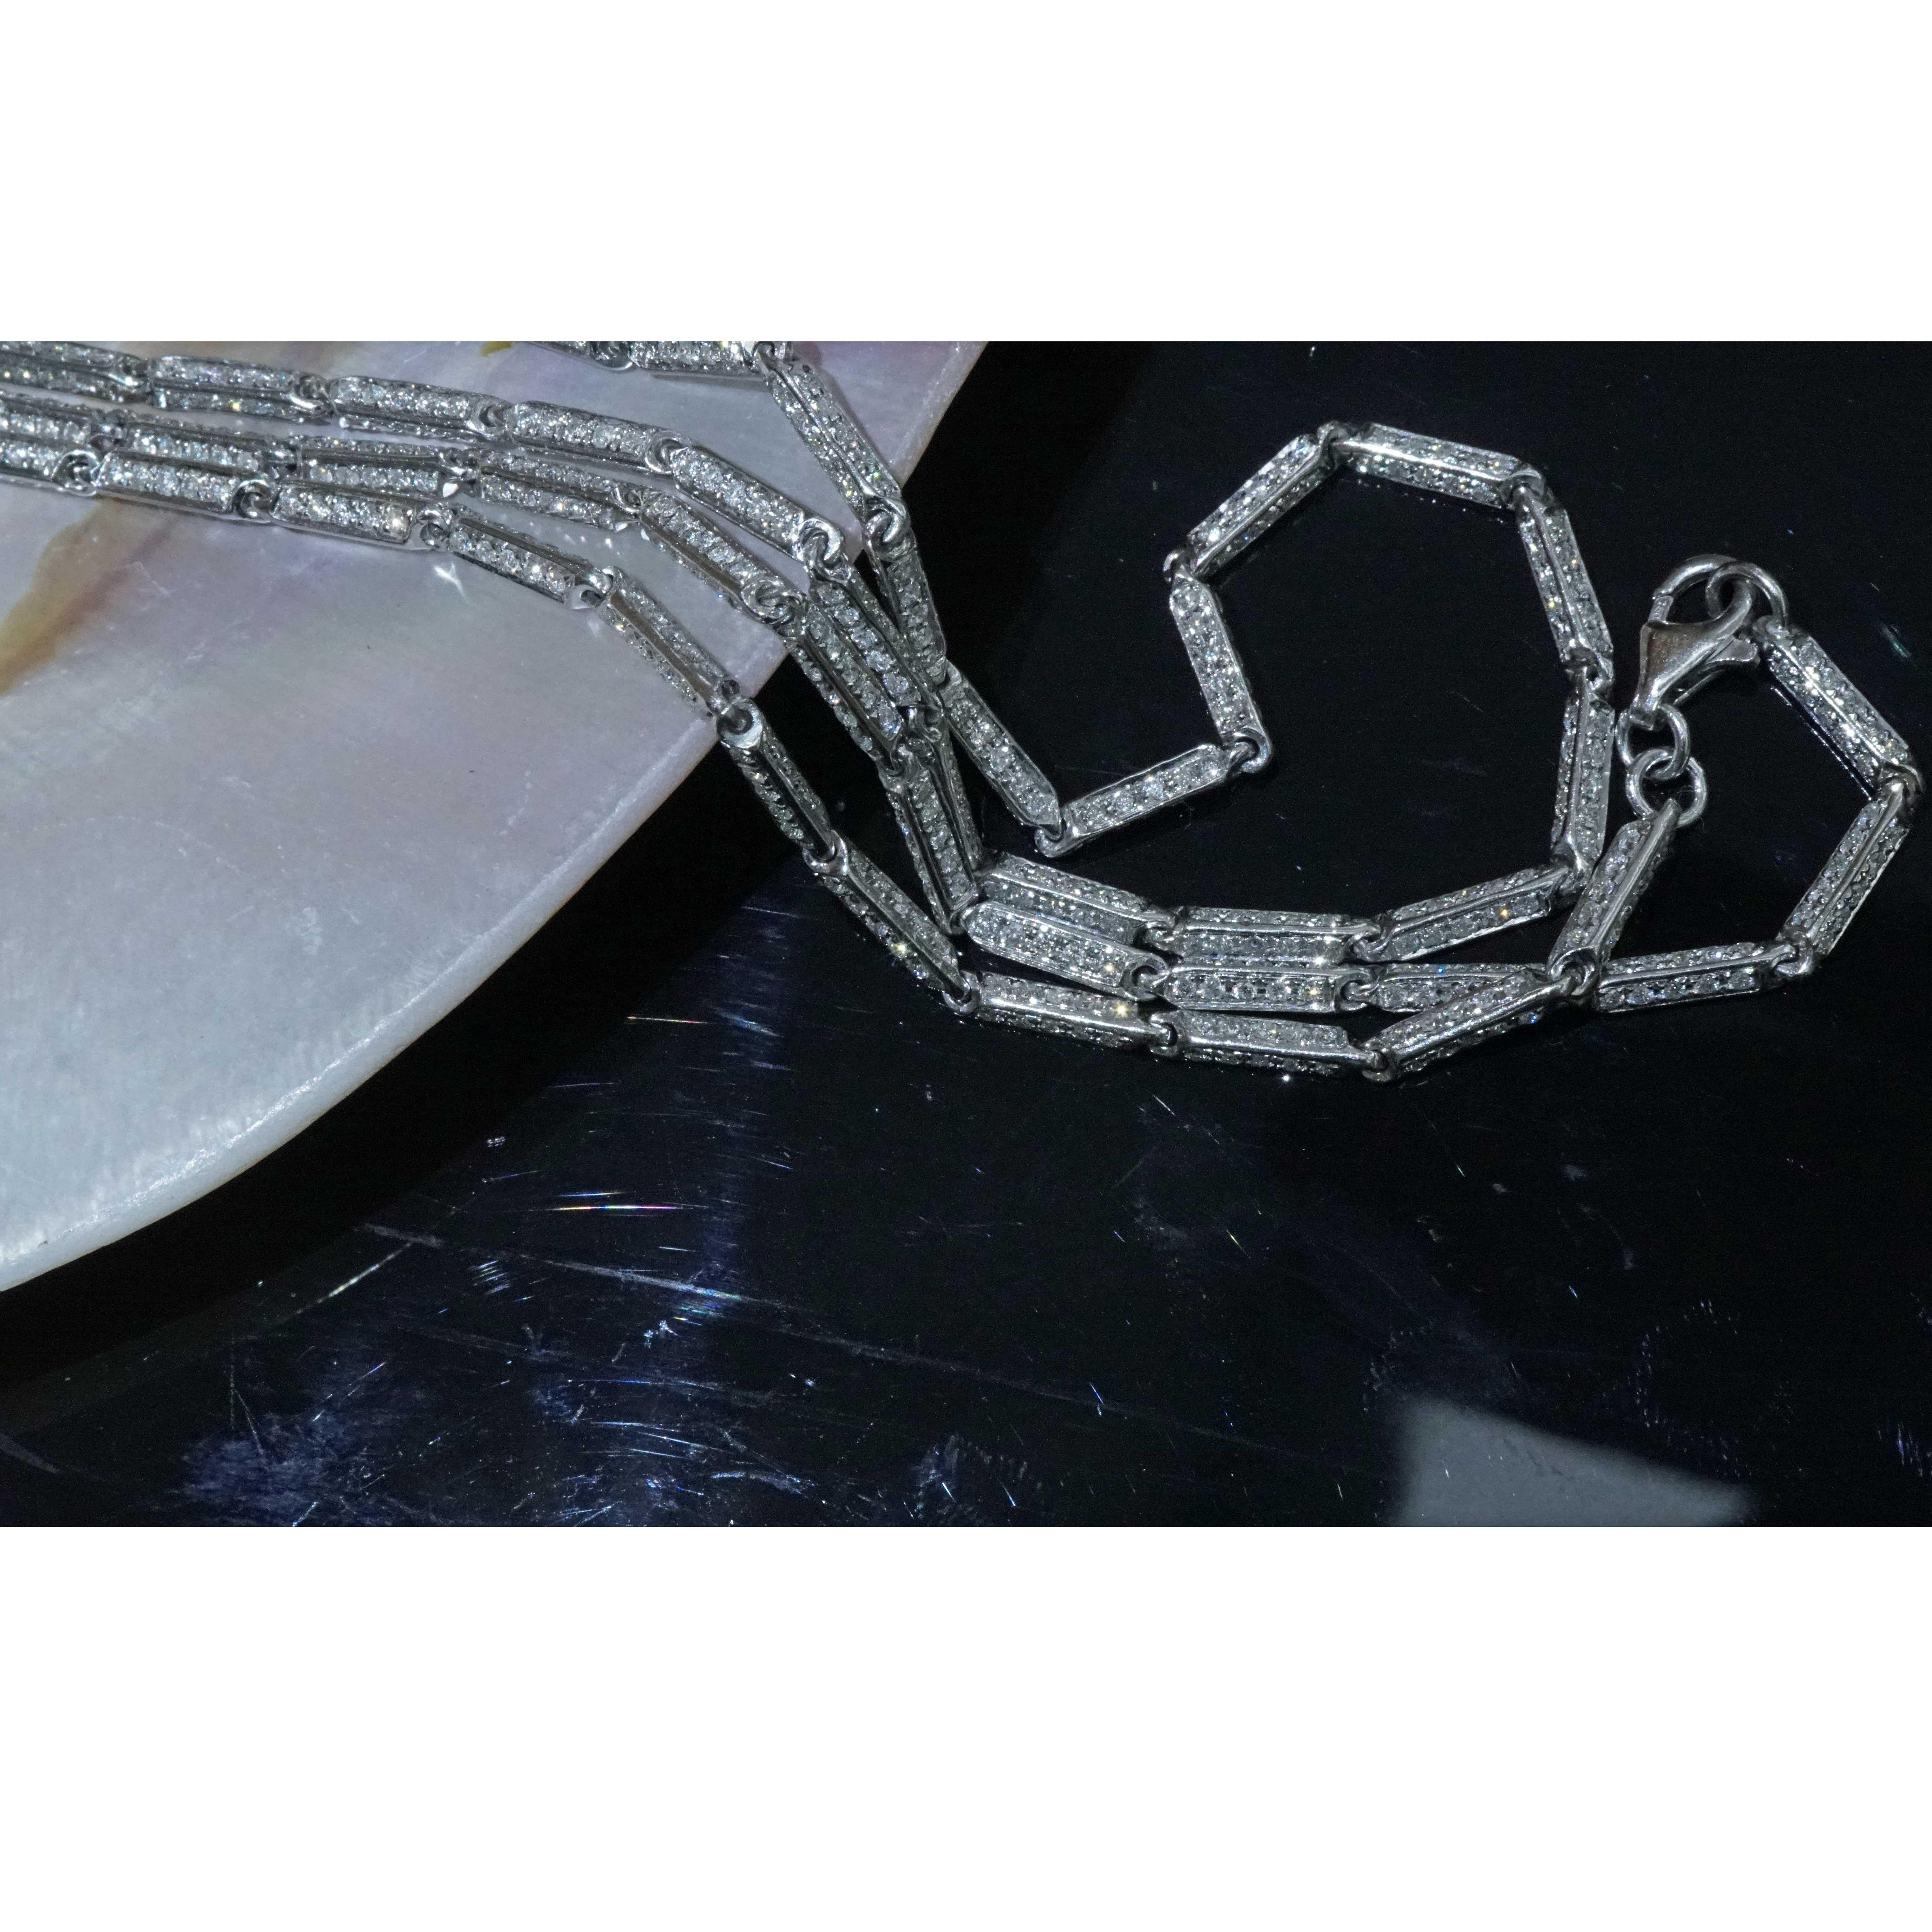 Brilliant Necklace 6.65 carat 1050 Diamonds OPERA Length 27 inch fully movable For Sale 2